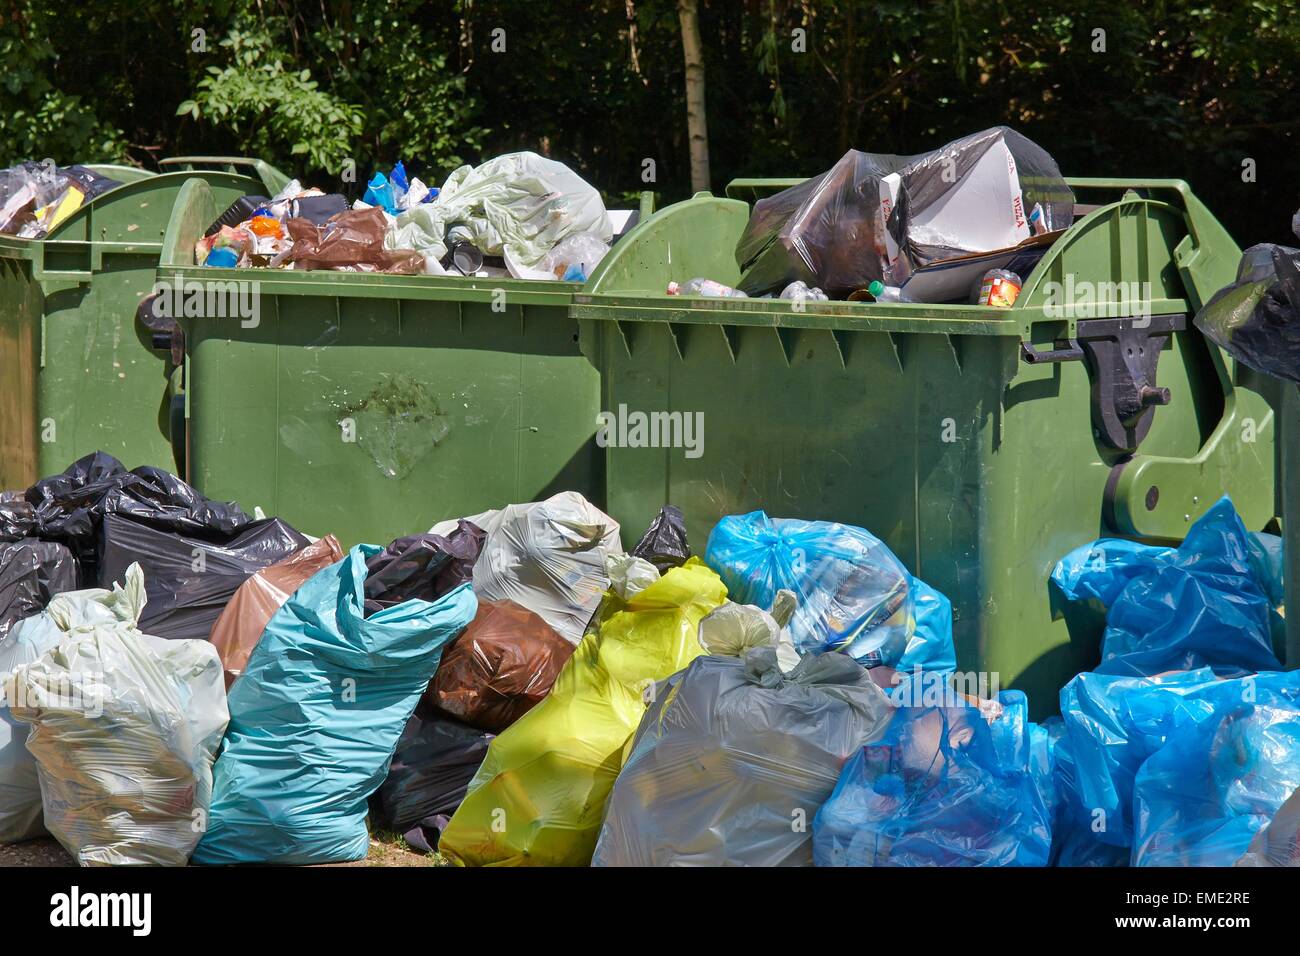 https://c8.alamy.com/comp/EME2RE/garbage-containers-full-overflowing-EME2RE.jpg